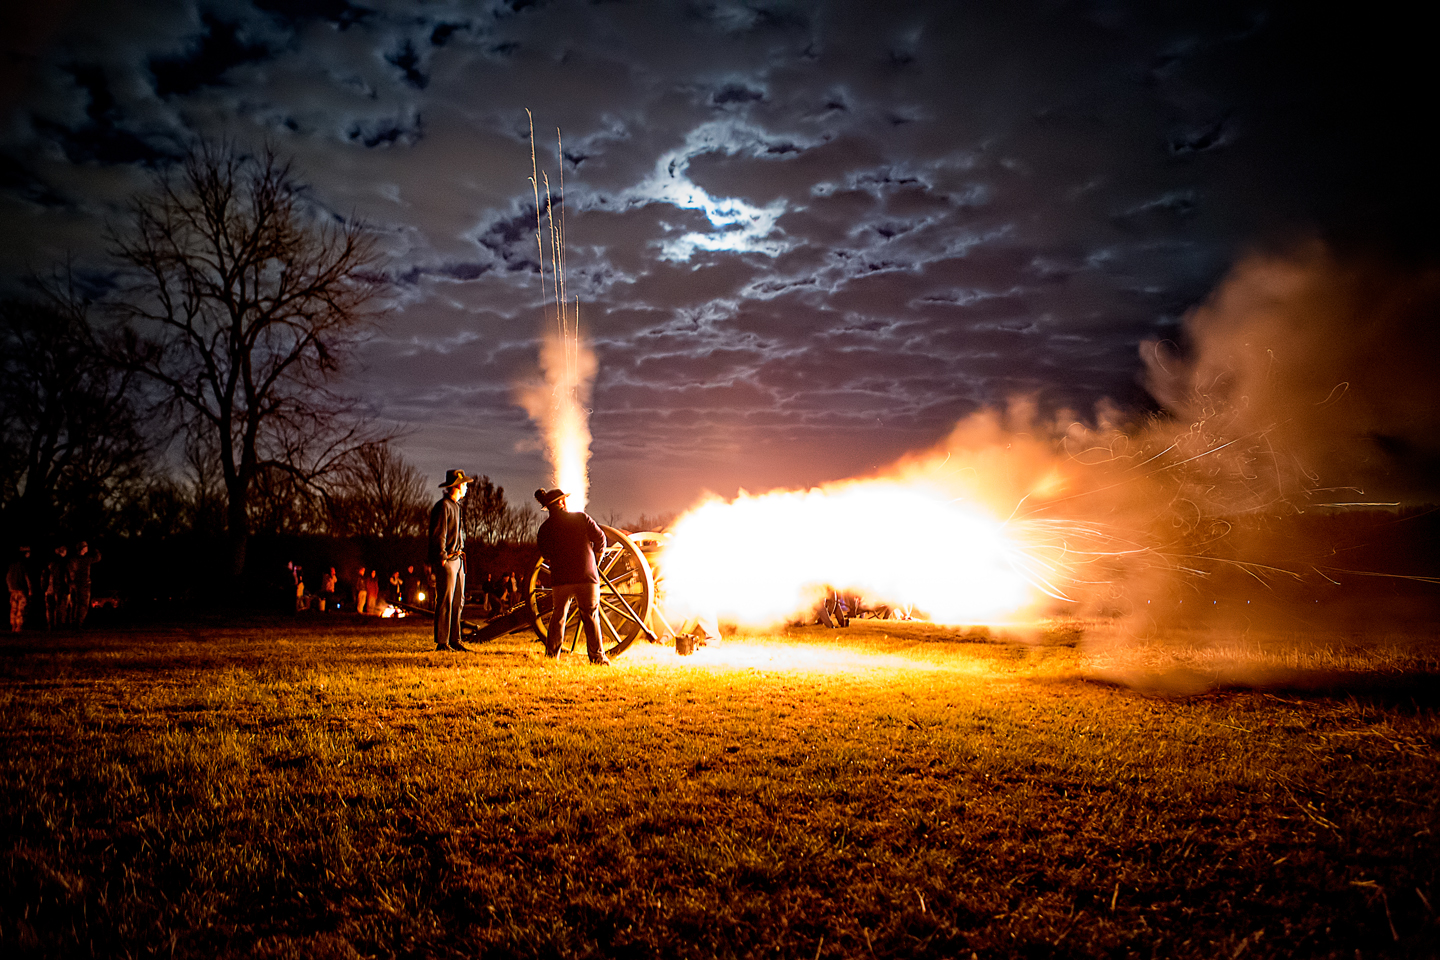 Night time artillery demonstration with orange flames brilliantly coming out of the cannons barrel and vent.